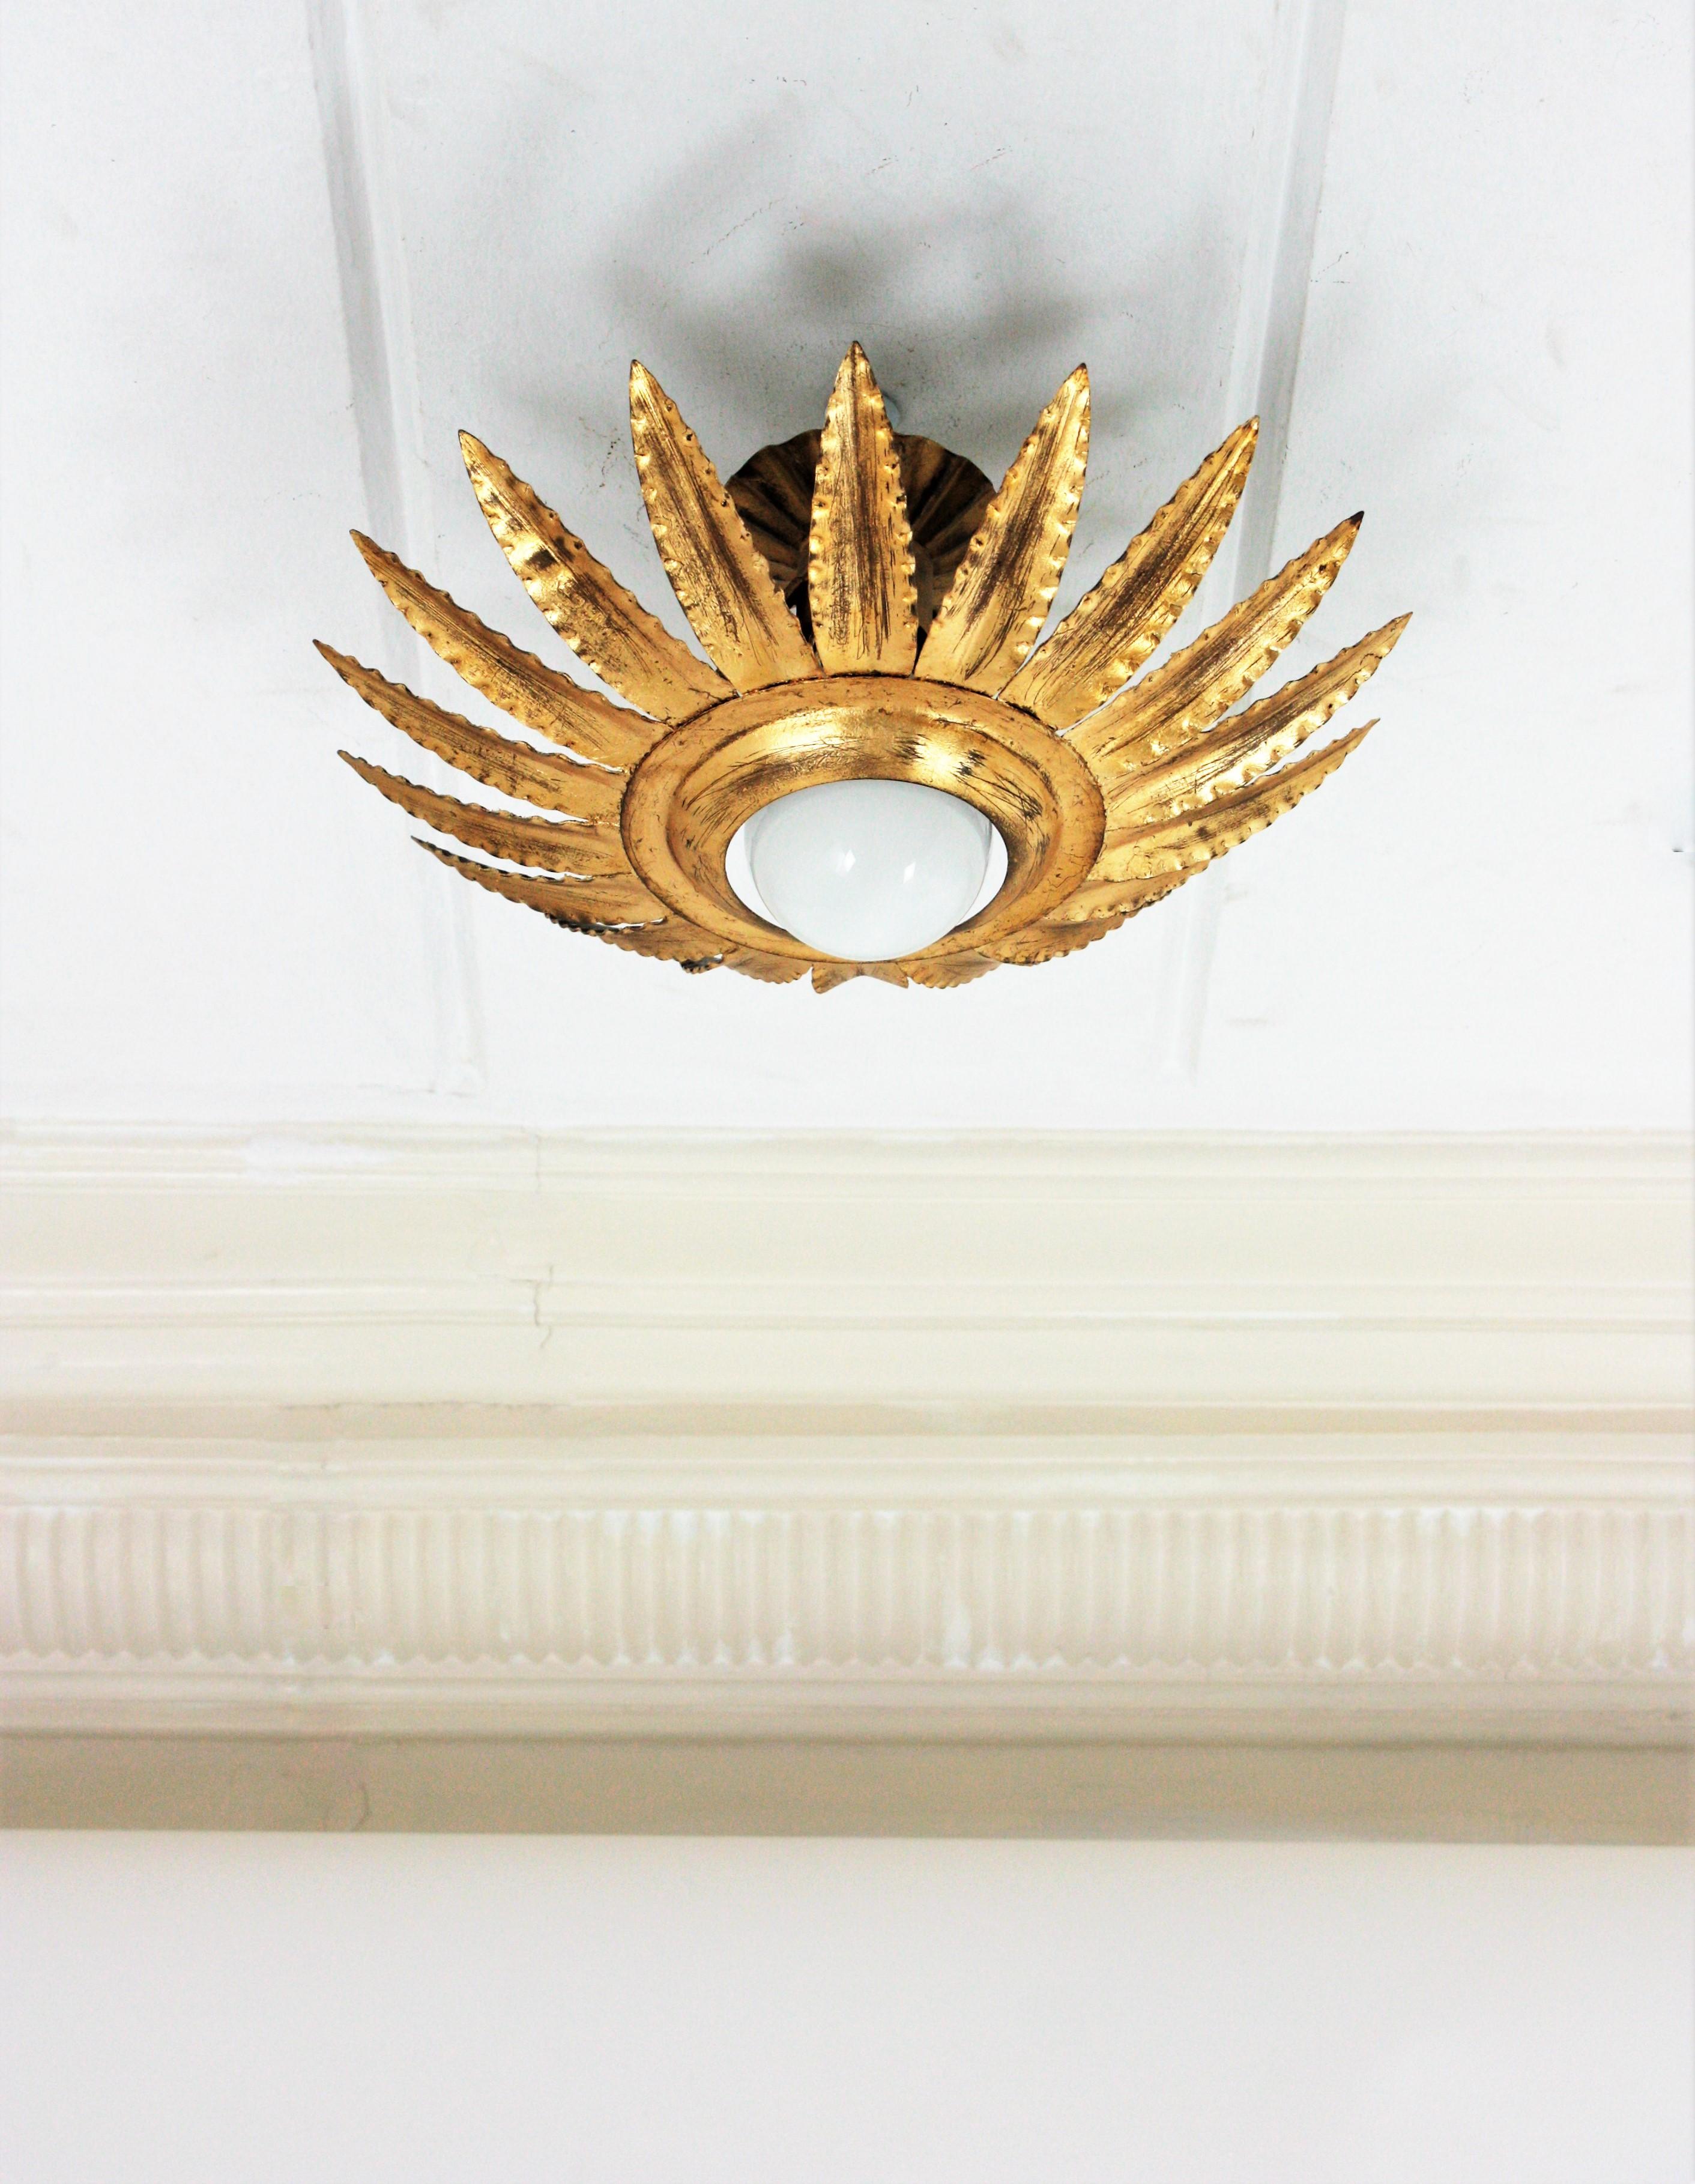 Eye-catching gilt wrought iron sunburst or flower shaped ceiling light fixture, wall sconce or pendant, Spain, 1960s.
A sunburst or flower shaped frame surrounds a central exposed bulb. It has gold leaf gilding and a terrific aged patina.
This